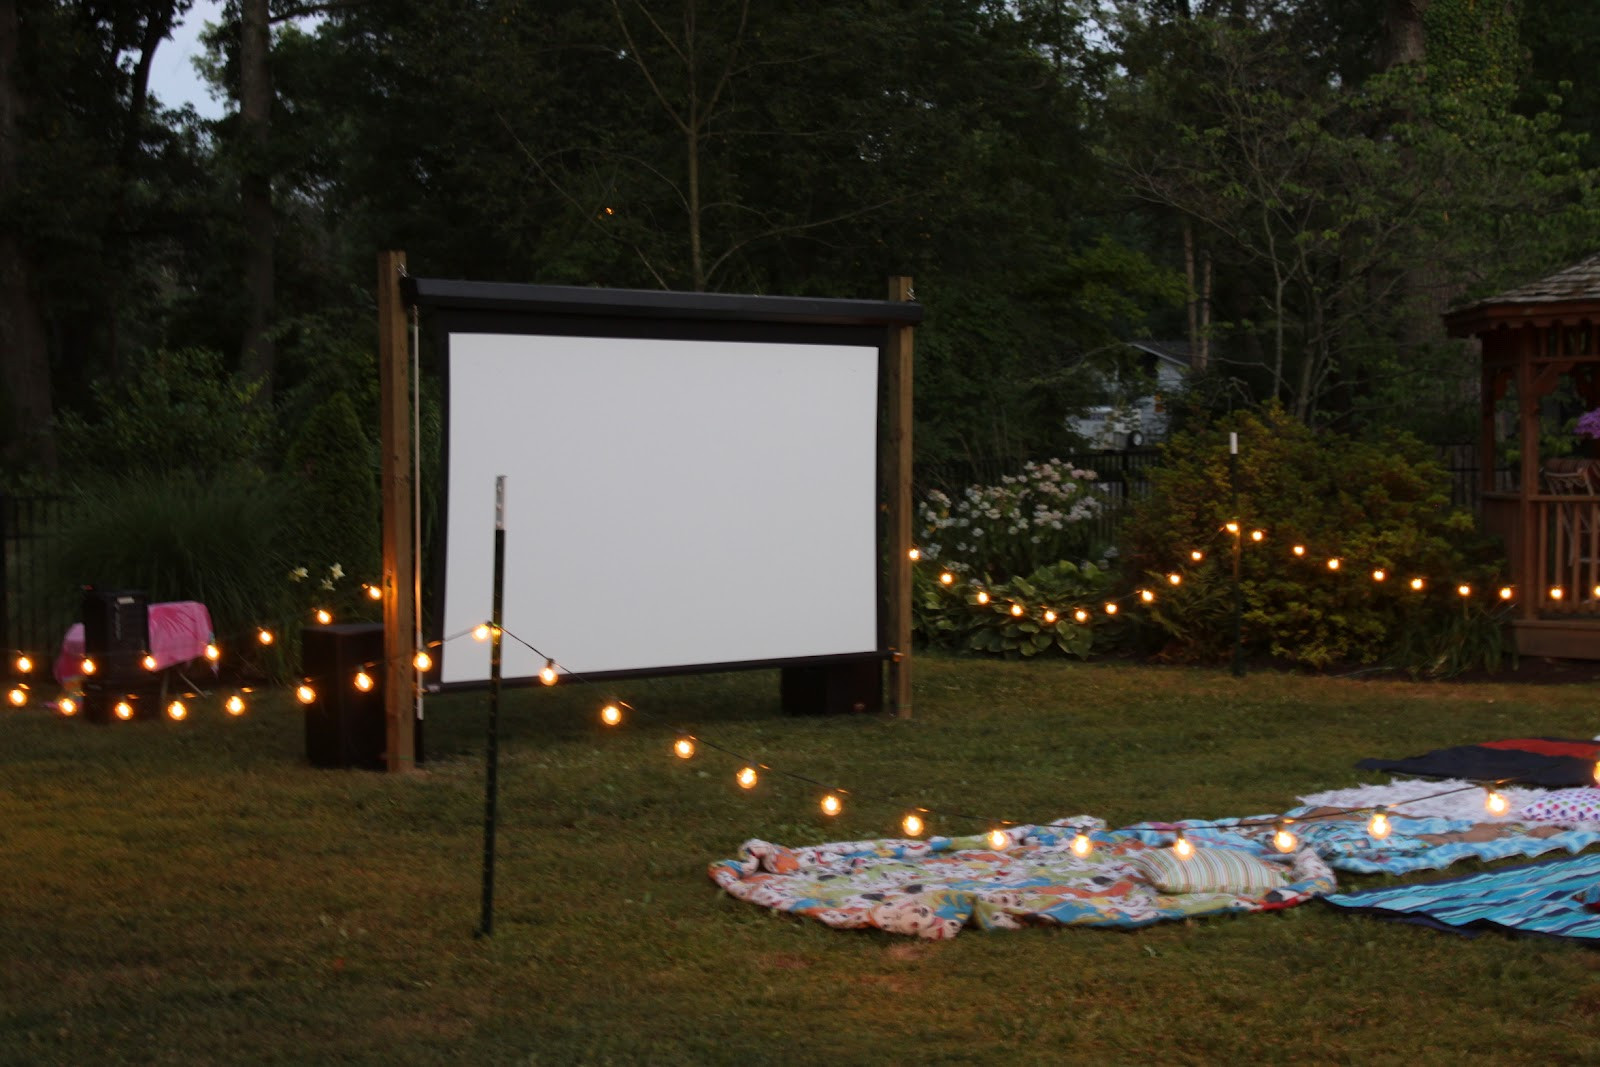 DIY Outdoor Movie Theater
 Easy DIY Outdoor Cinema Will Make Your Yard The Ultimate